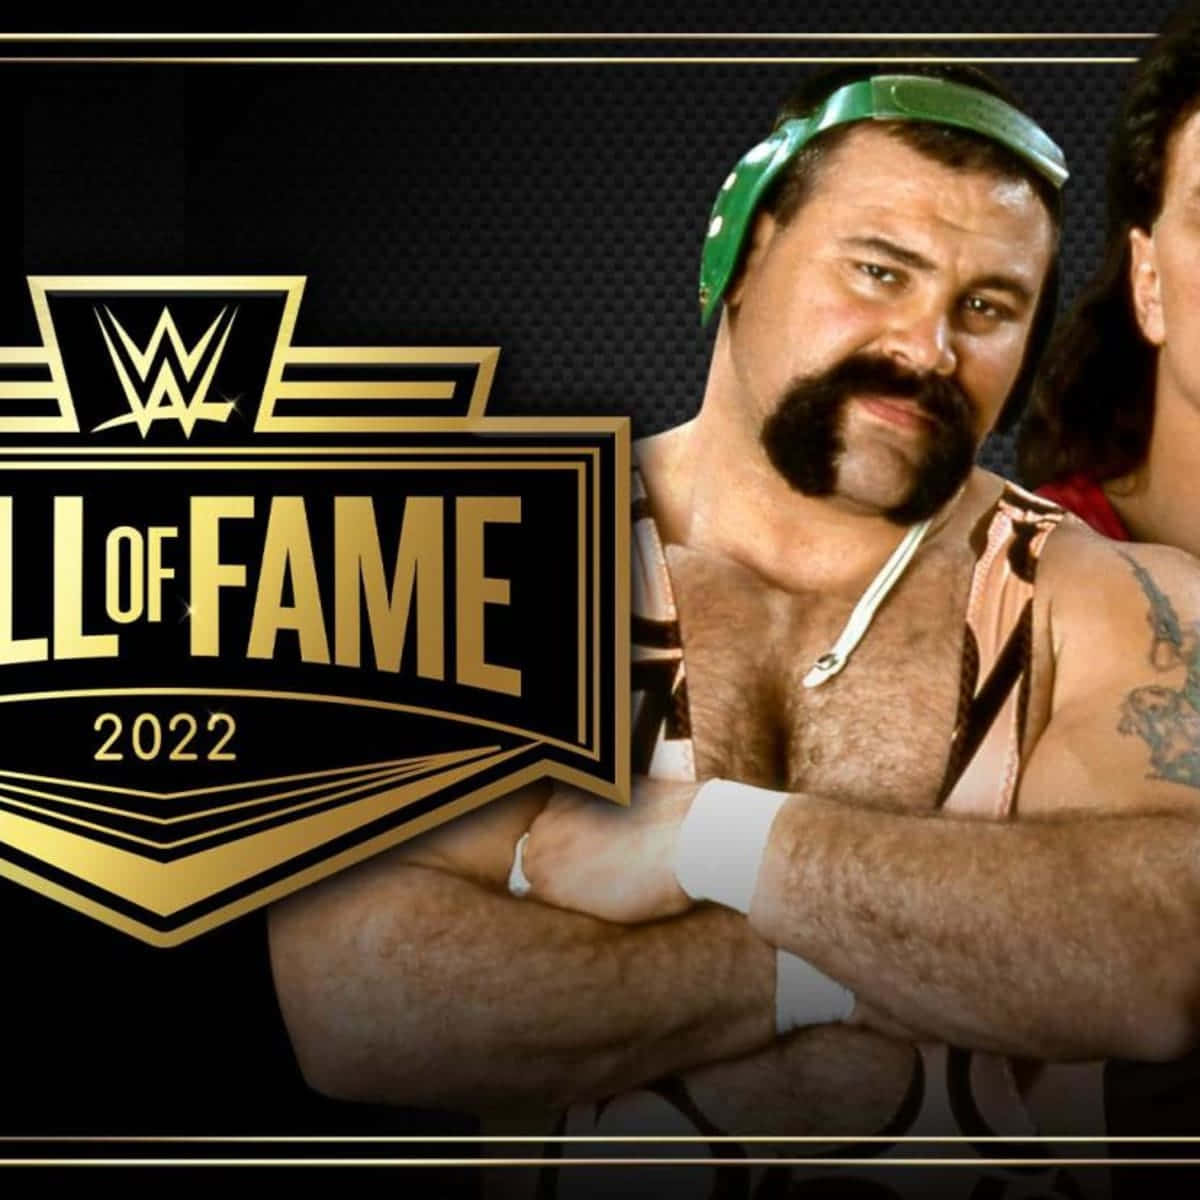 Rick Steiner being honored at the Hall of Fame 2022. Wallpaper